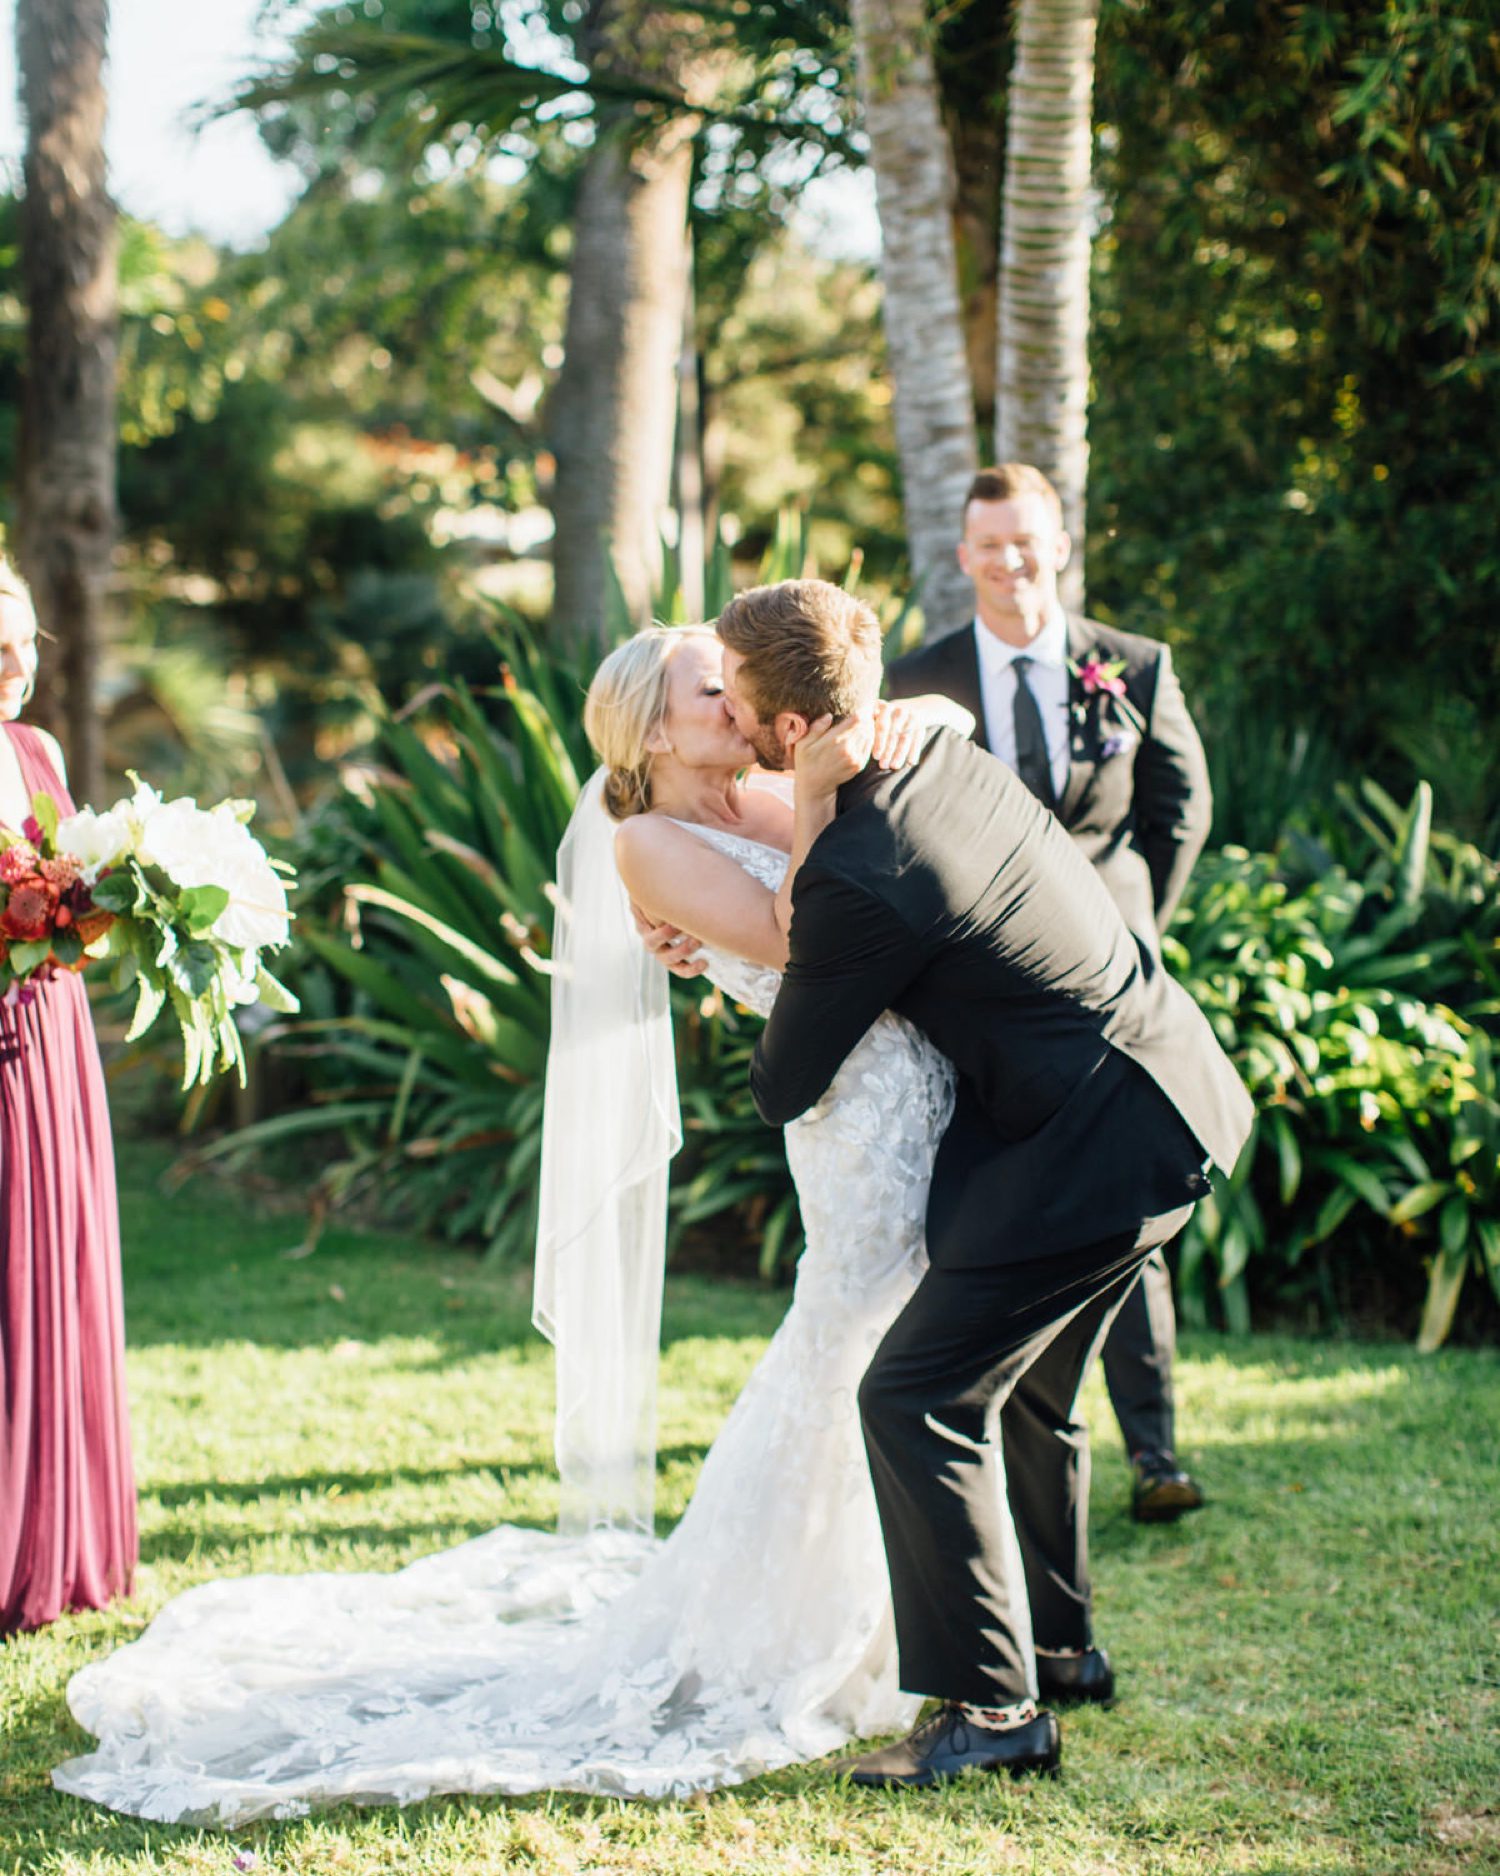 First Kiss between Bride and Groom as Husband and Wife